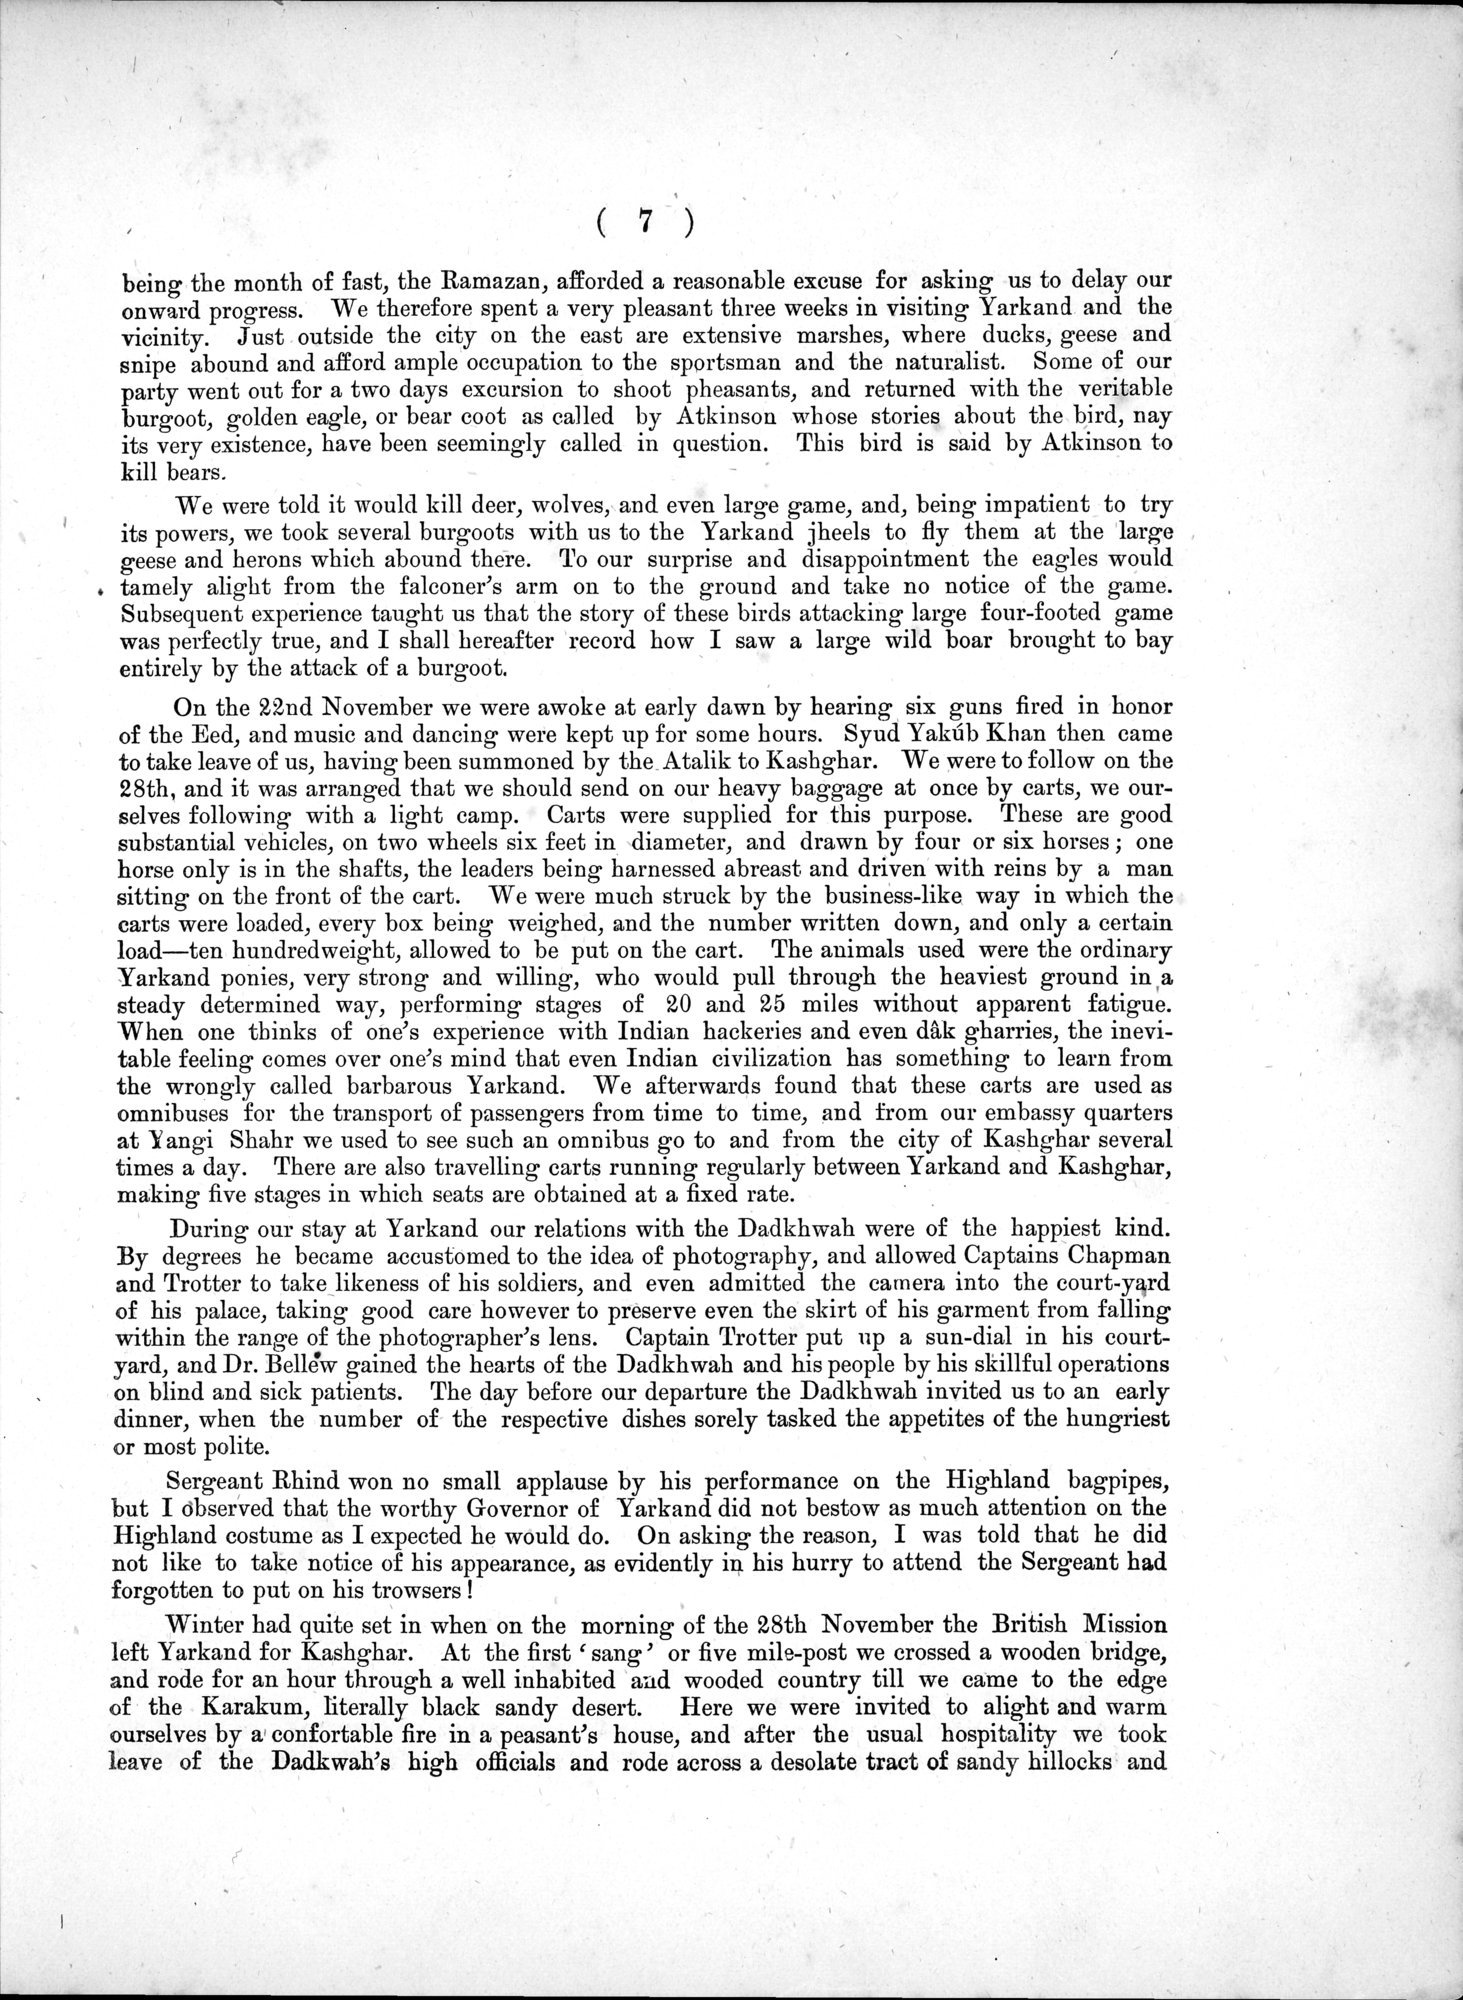 Report of a Mission to Yarkund in 1873 : vol.1 / Page 29 (Grayscale High Resolution Image)